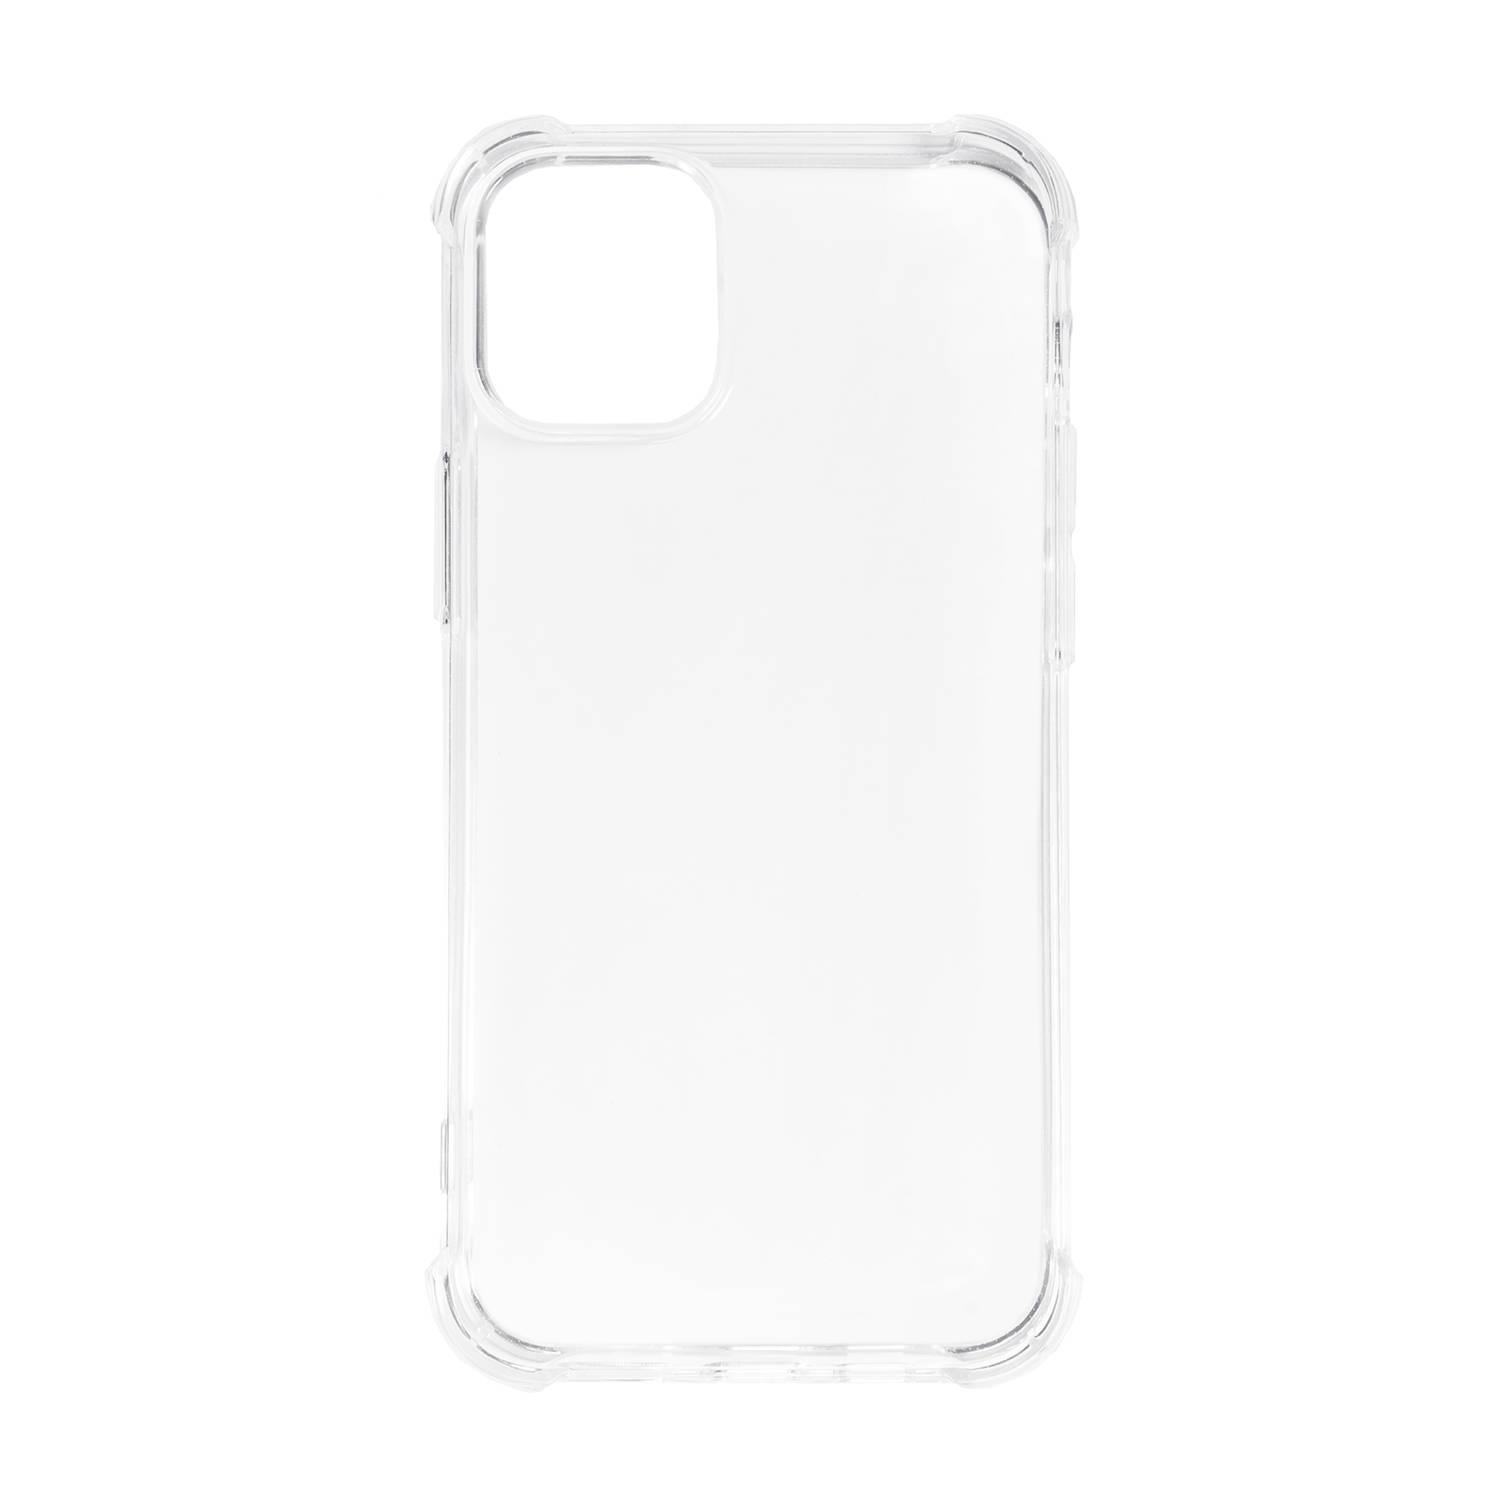 BMAX Airbag TPU soft case hoesje voor iPhone 12 - Clear/Transparant